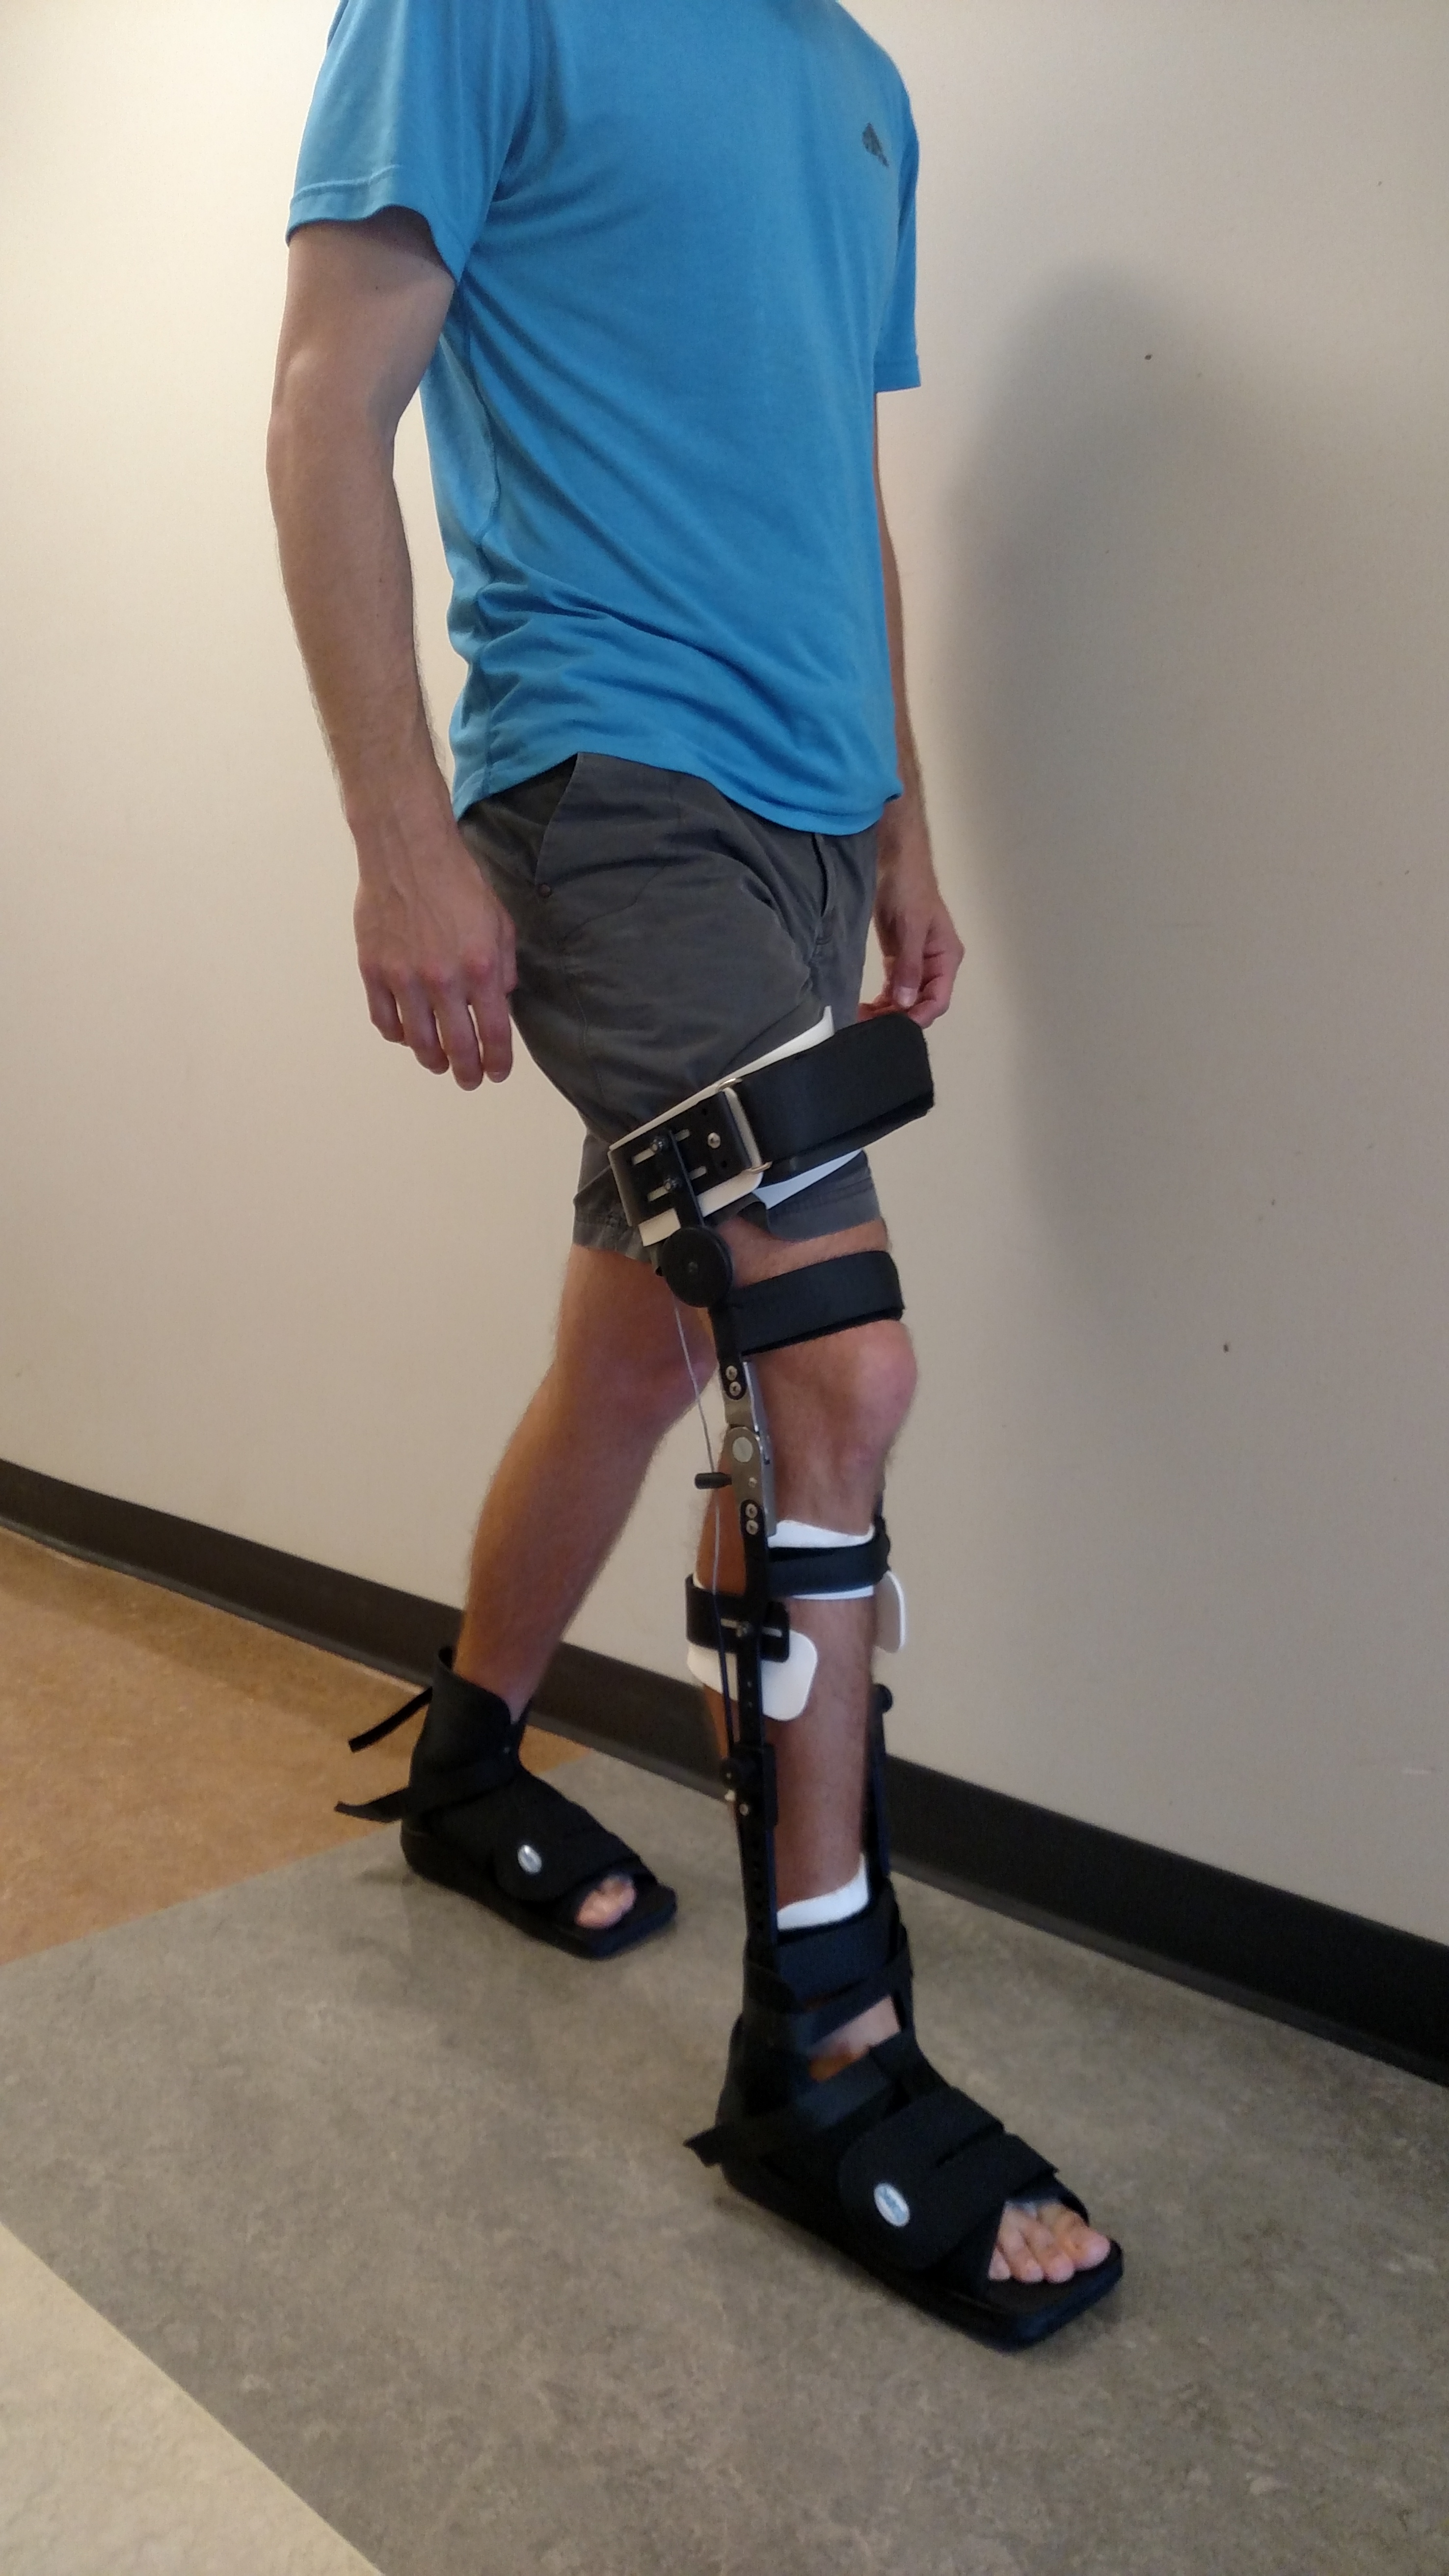 Applying stance phase knee control during gait for people with stroke undergoing inpatient rehabilitation.